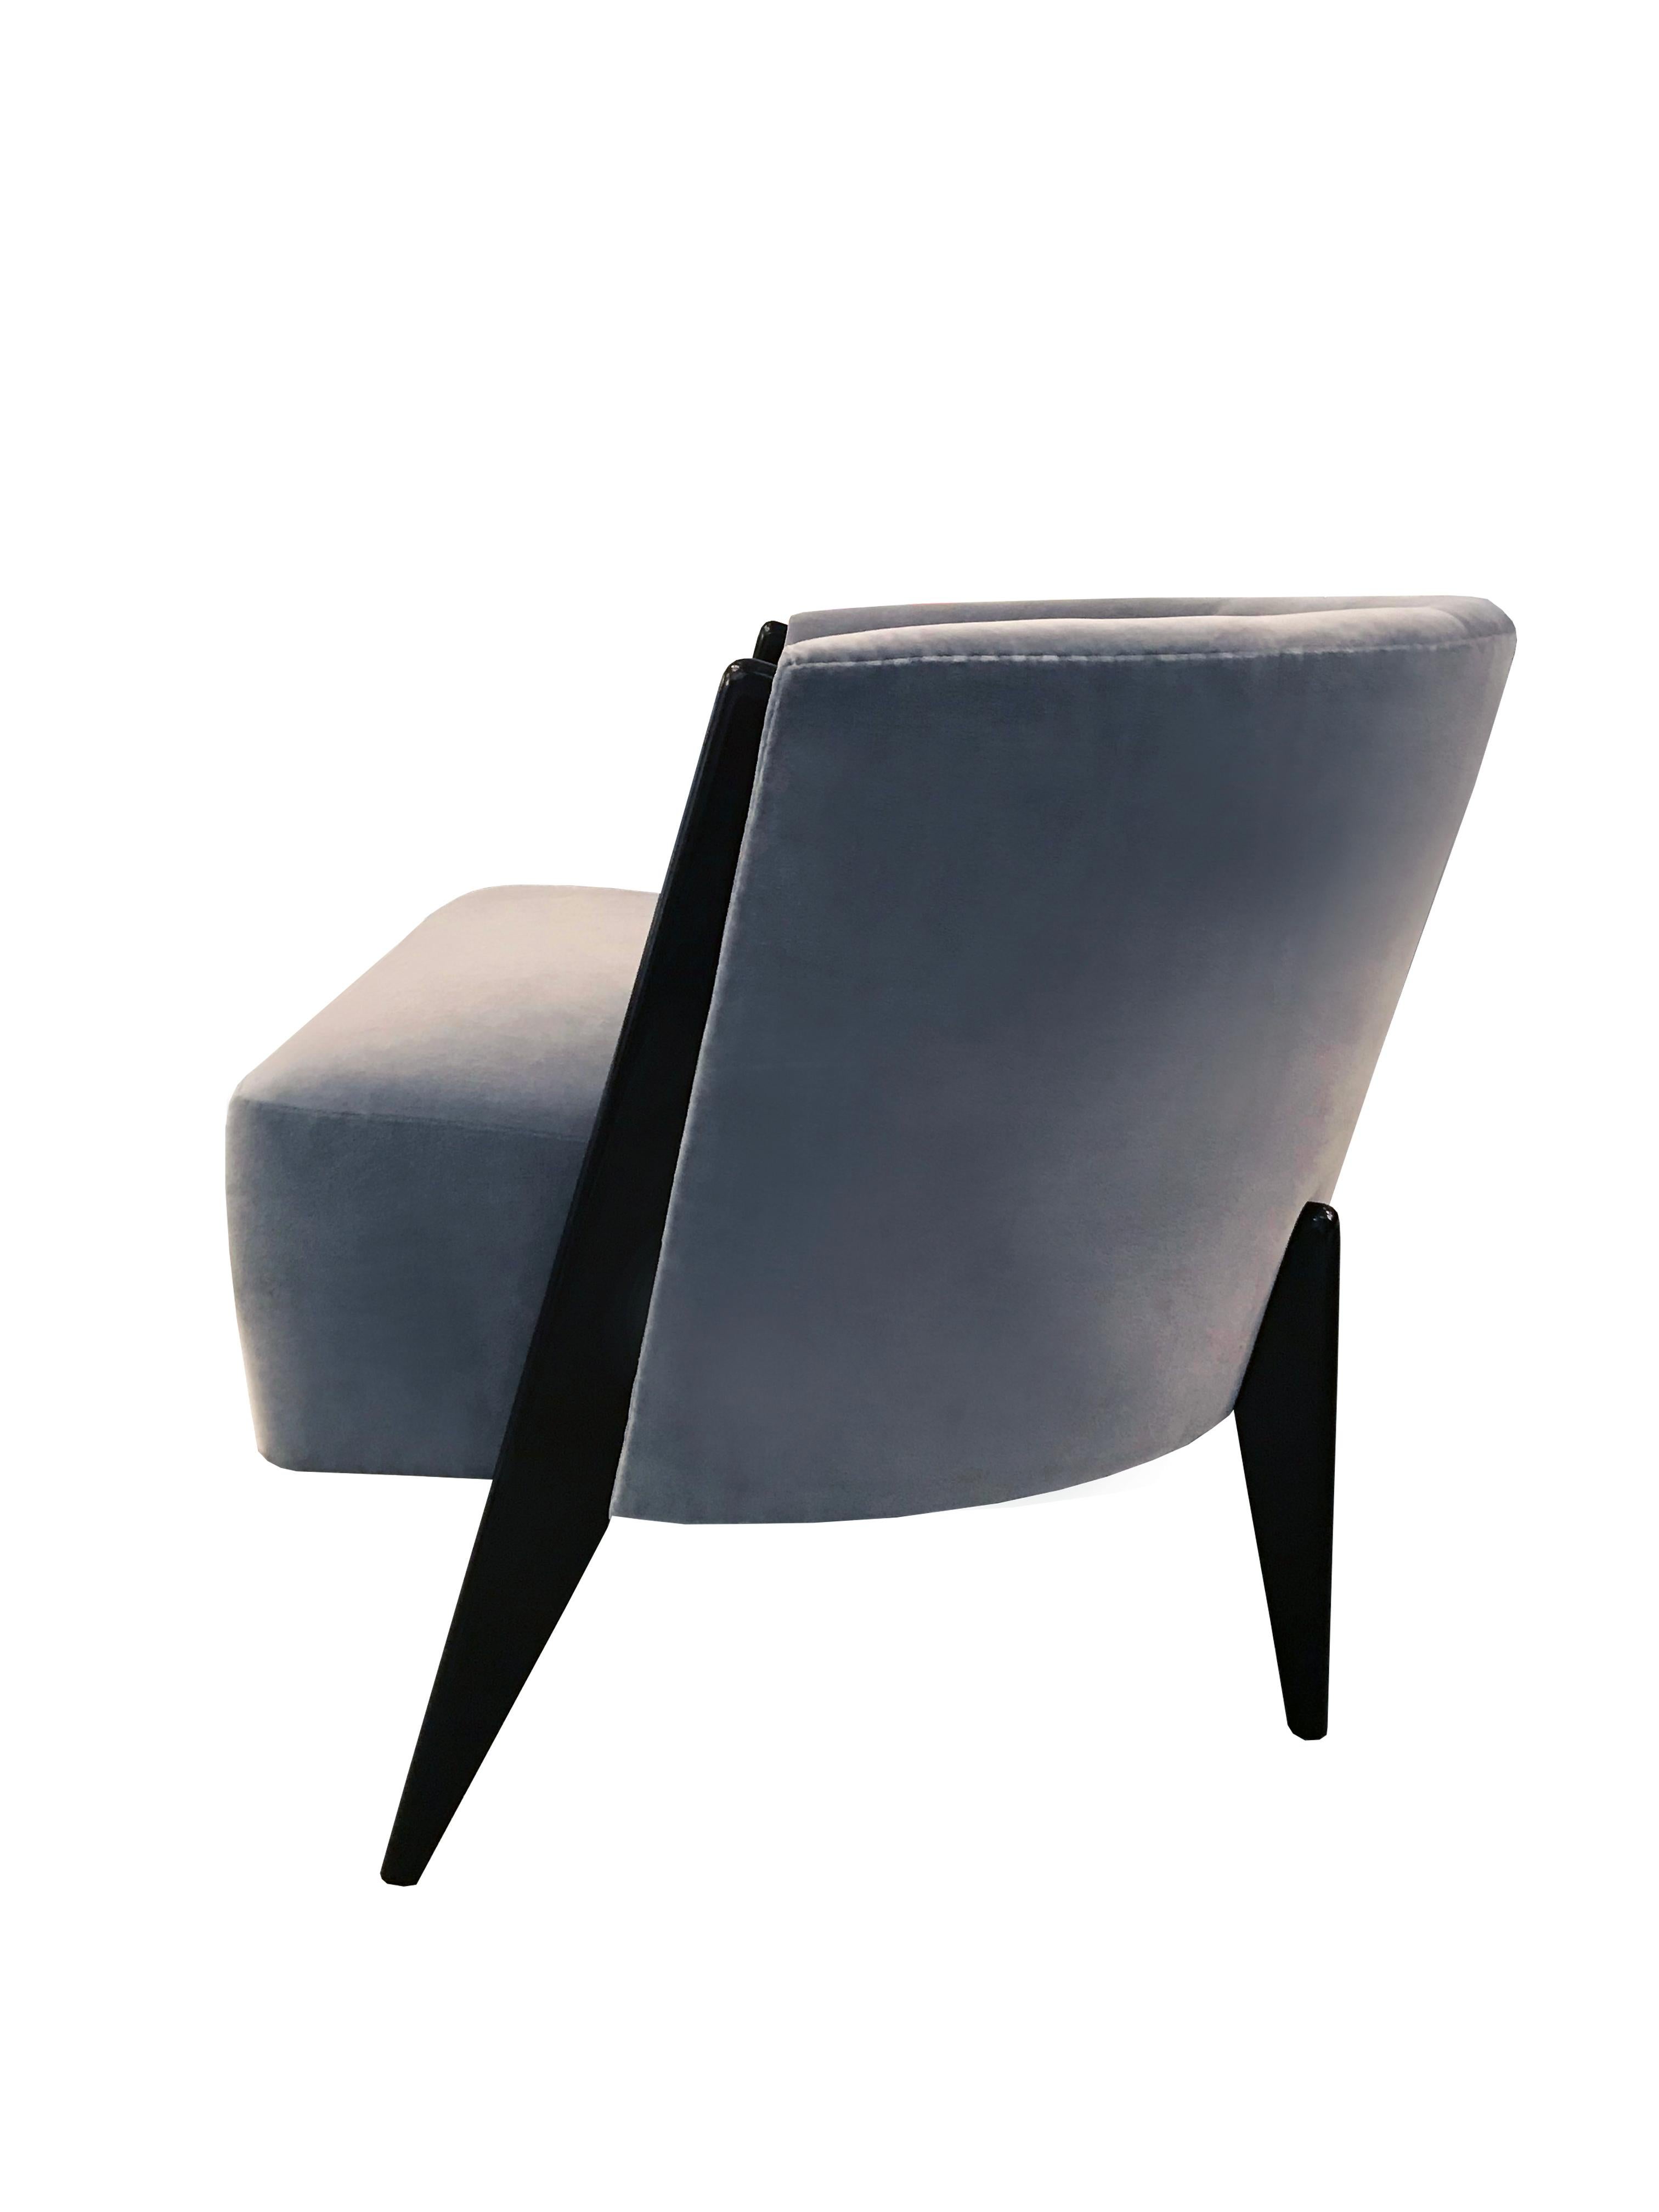 The Hudson chair, designed by Irwin Feld for CF Modern, has a rounded back that is sectioned into three panels and hugs the thick seat cushion. Shown here finished in Dark Walnut with a blue grey upholstery.

CF Modern merchandise is available in